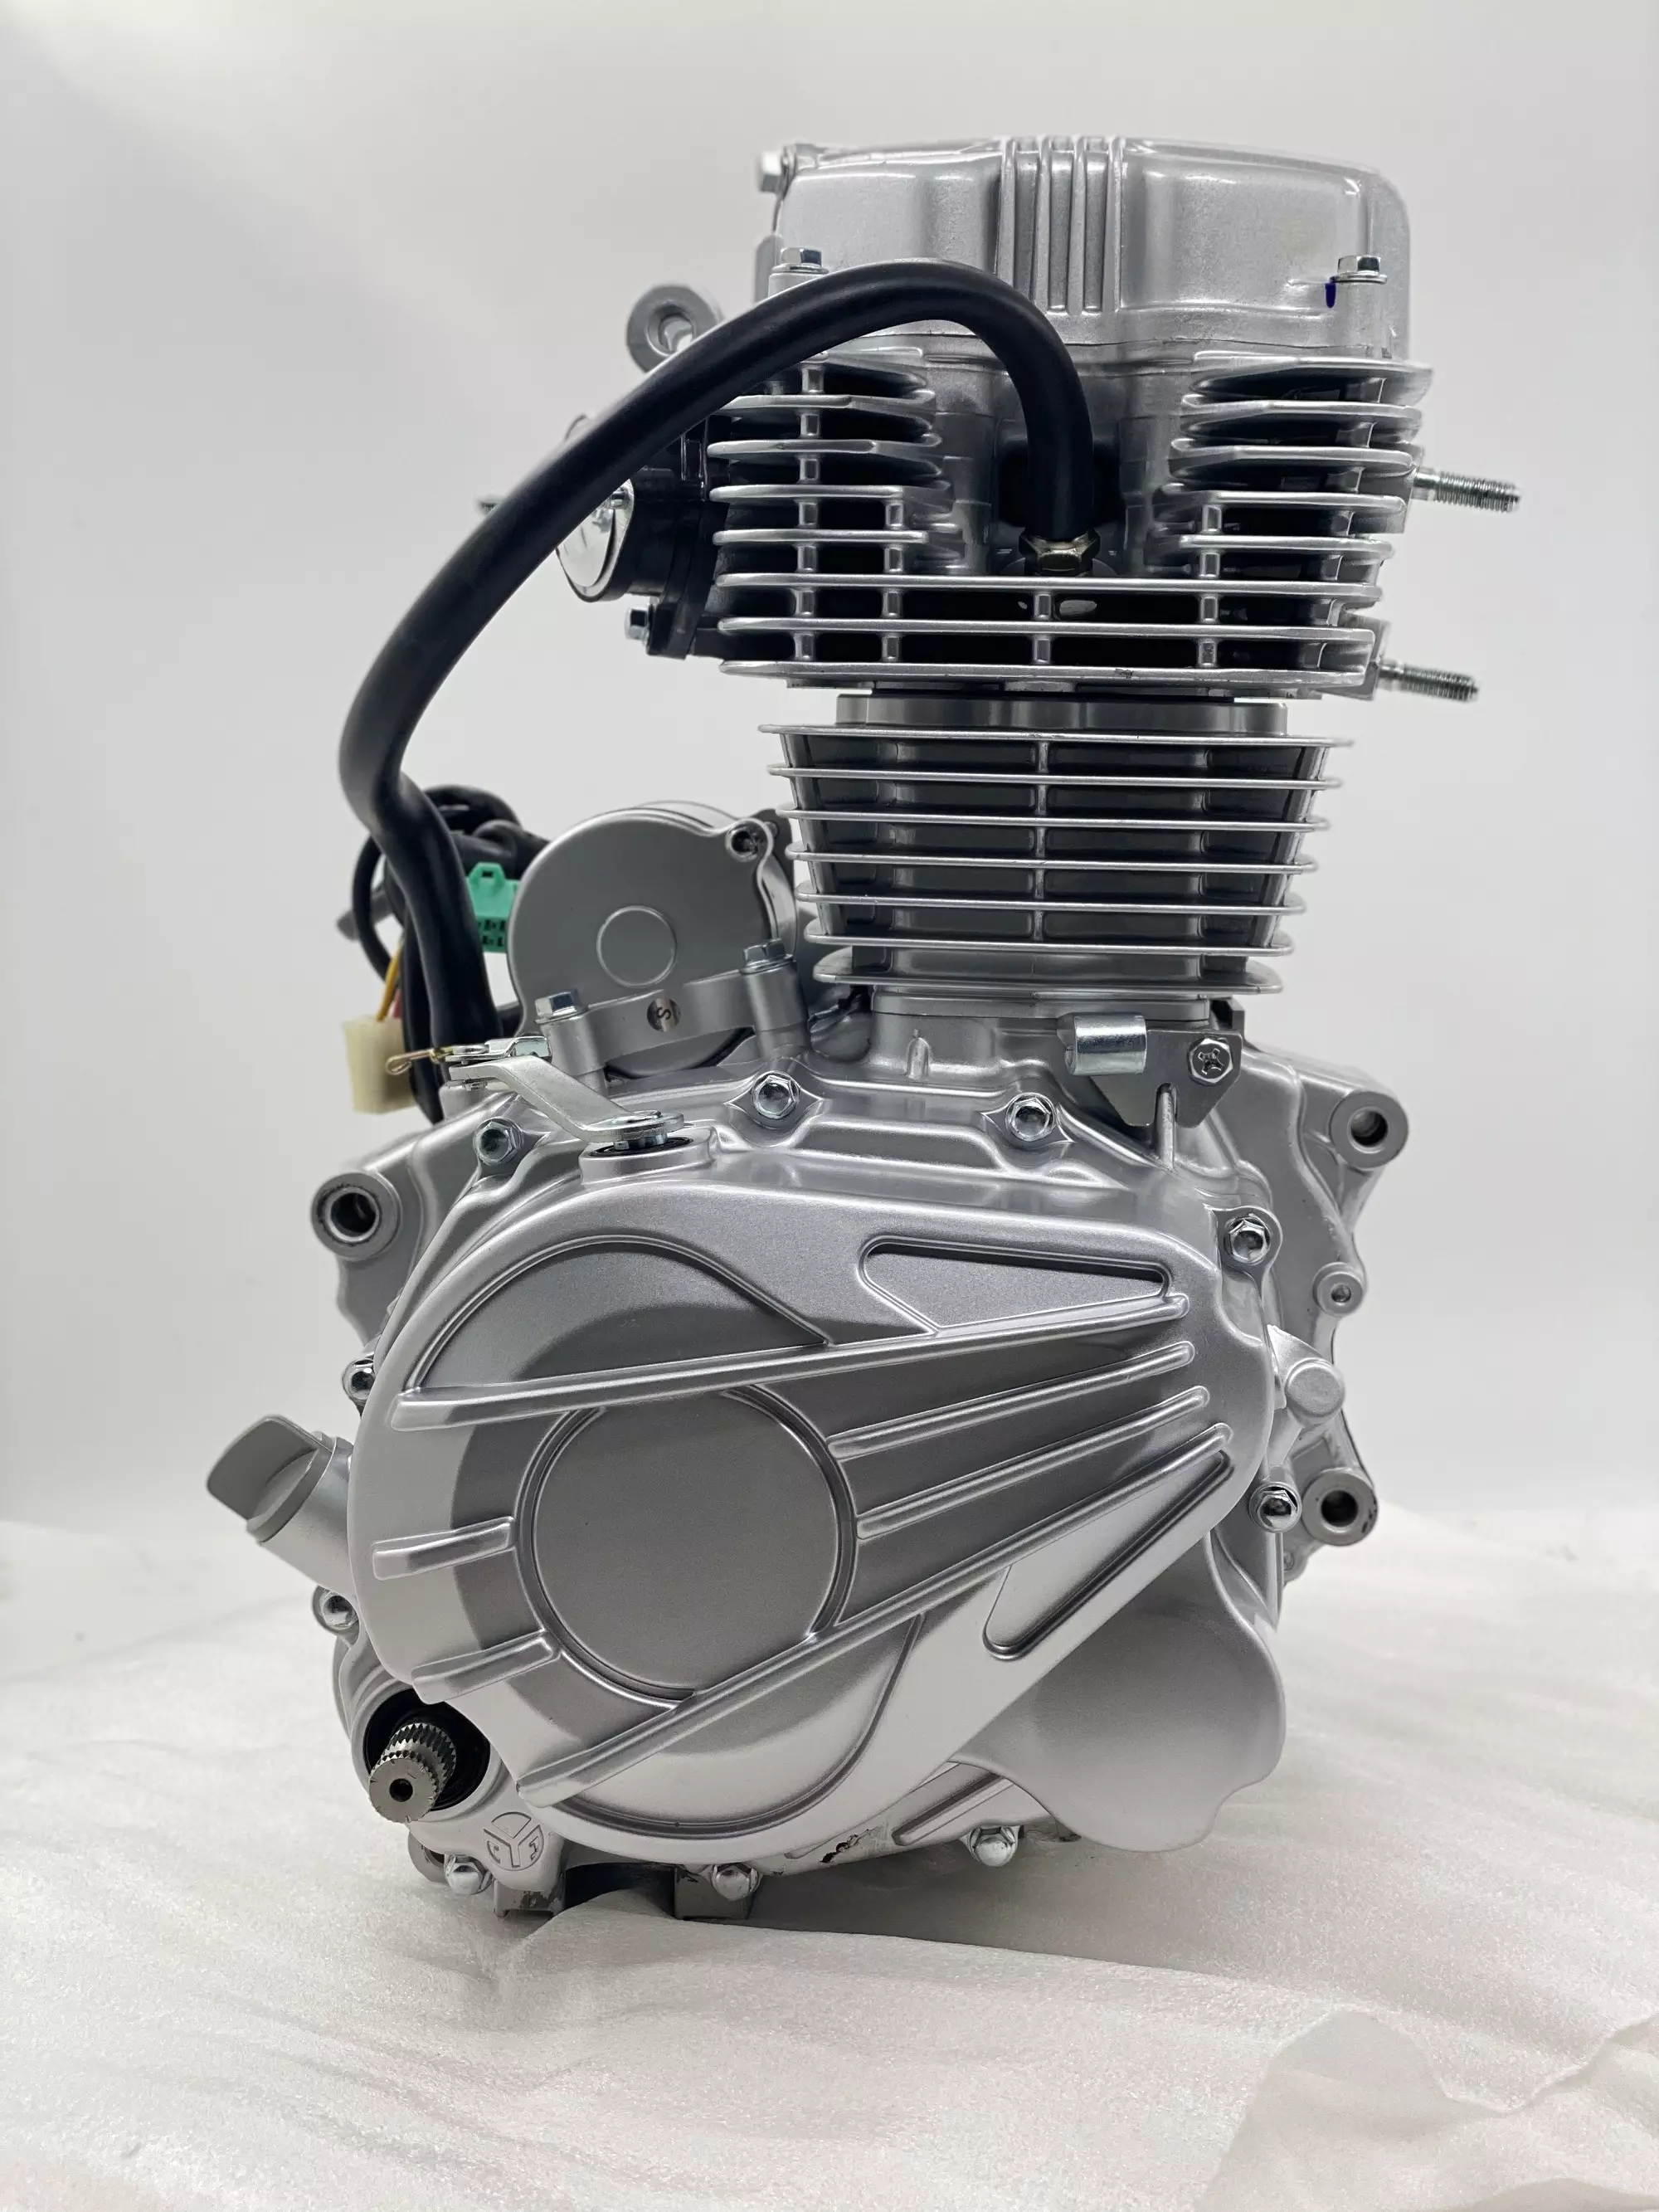 DAYANG 175cc air-cooled Engine for Motorcycle Three Wheel Cargo Tricycle Silver  OEM  Cylinder Style Color CCC Style Performance